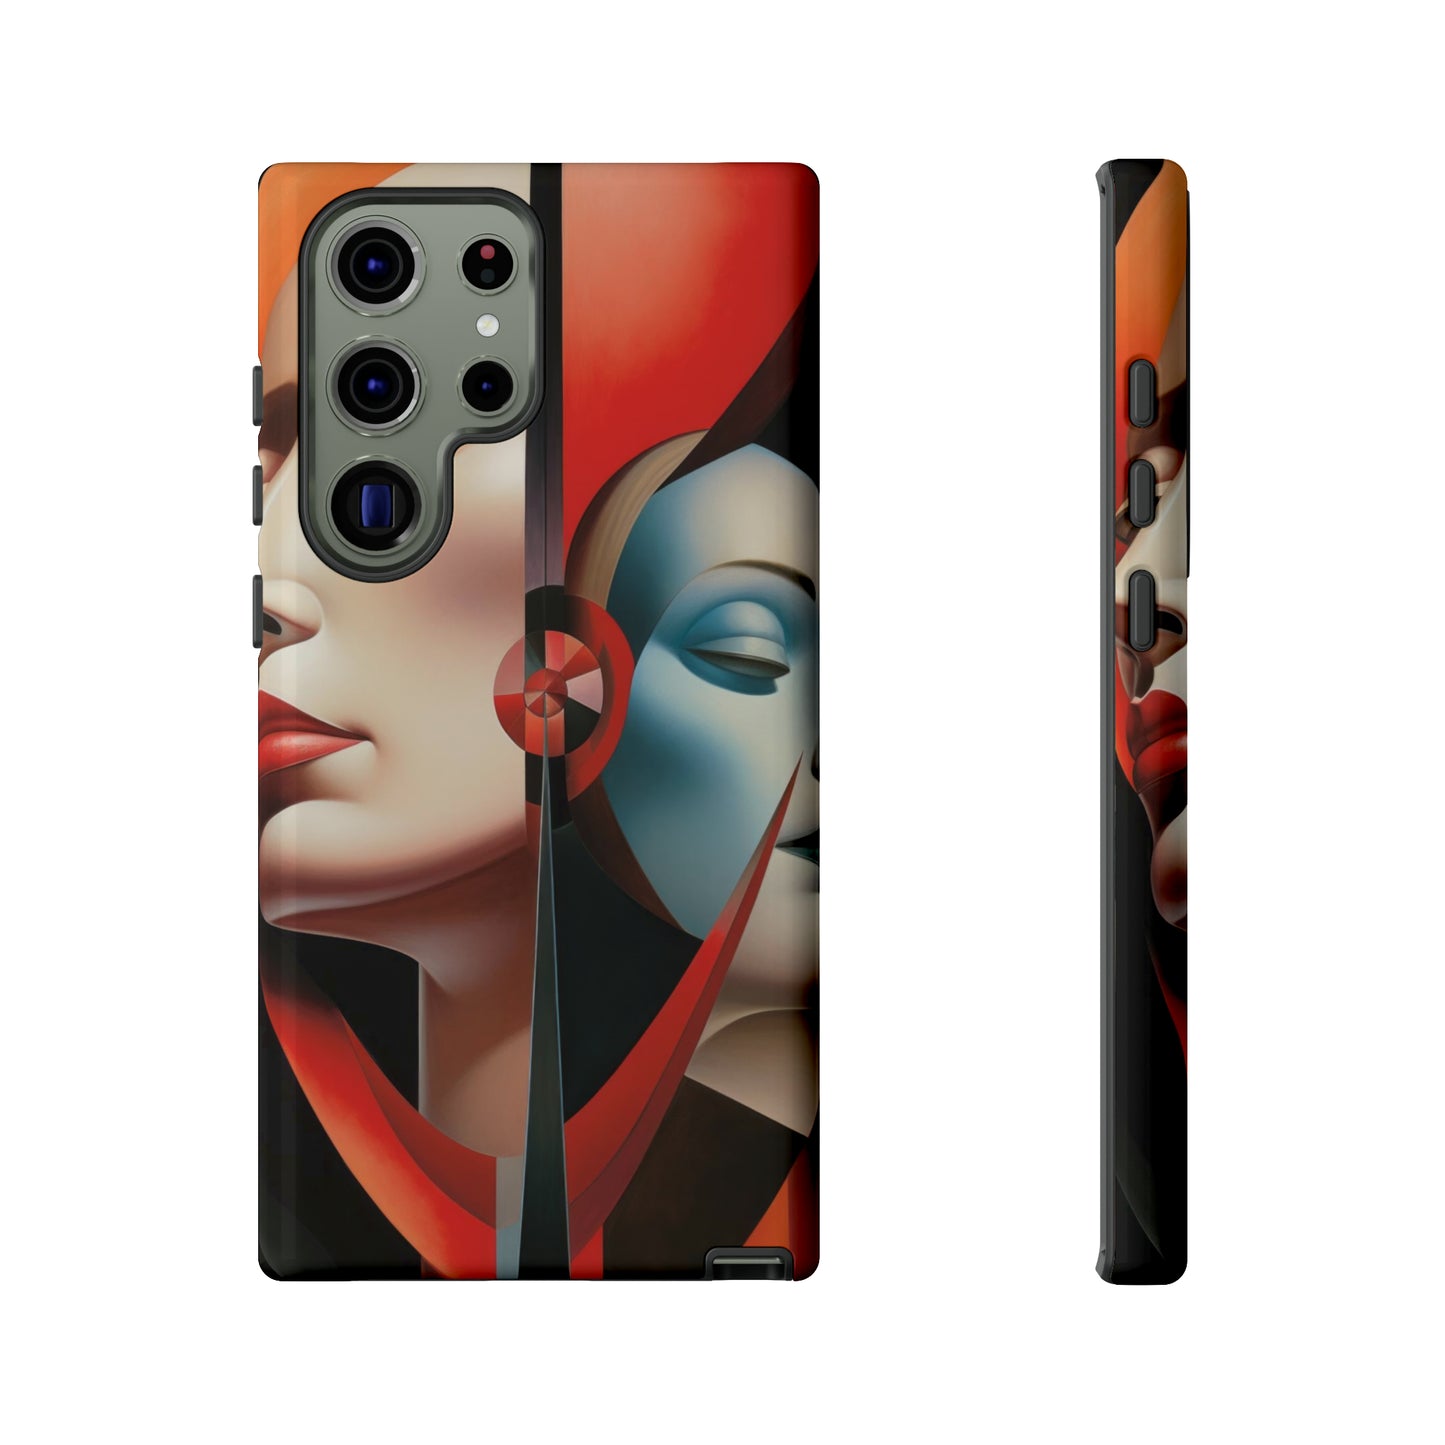 Surreal Dual Emotion Faces Phone Case - Masked Red & Blue Moods for iPhone, Samsung, Pixel